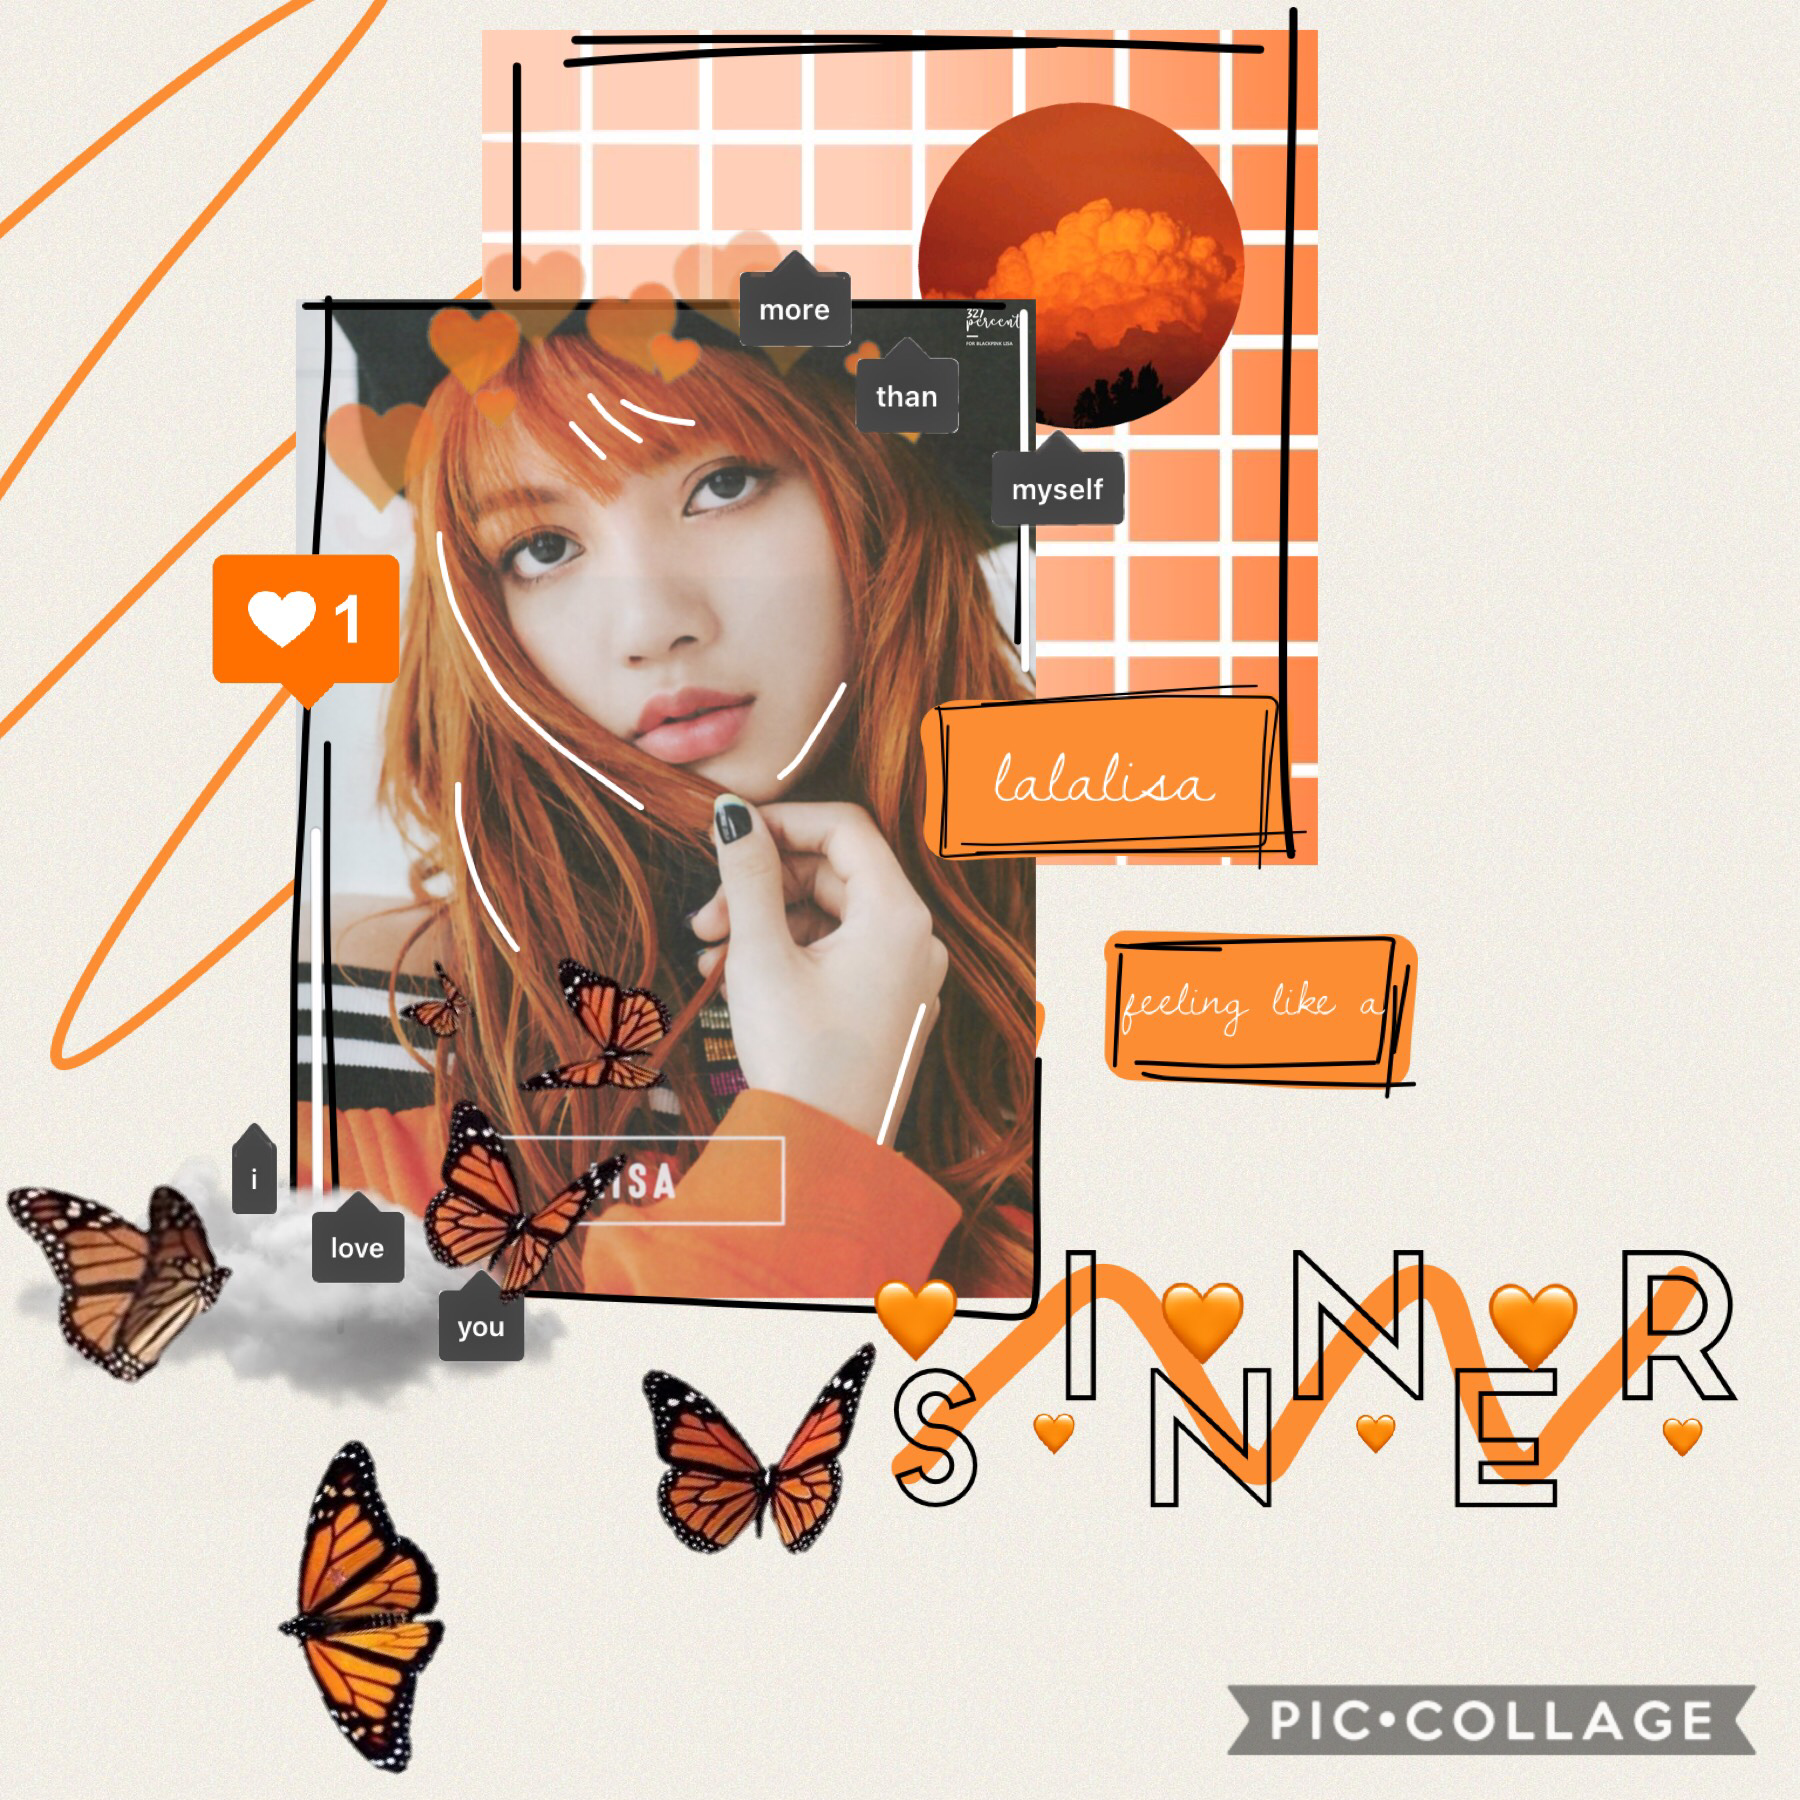 🧡 tap 🧡
Here’s a Lisa for ya’ll... she is totally rocking the orange! I’m trying to do more collages of a variety of kpop bands now!!! Jennie next! 🔥🔥🔥